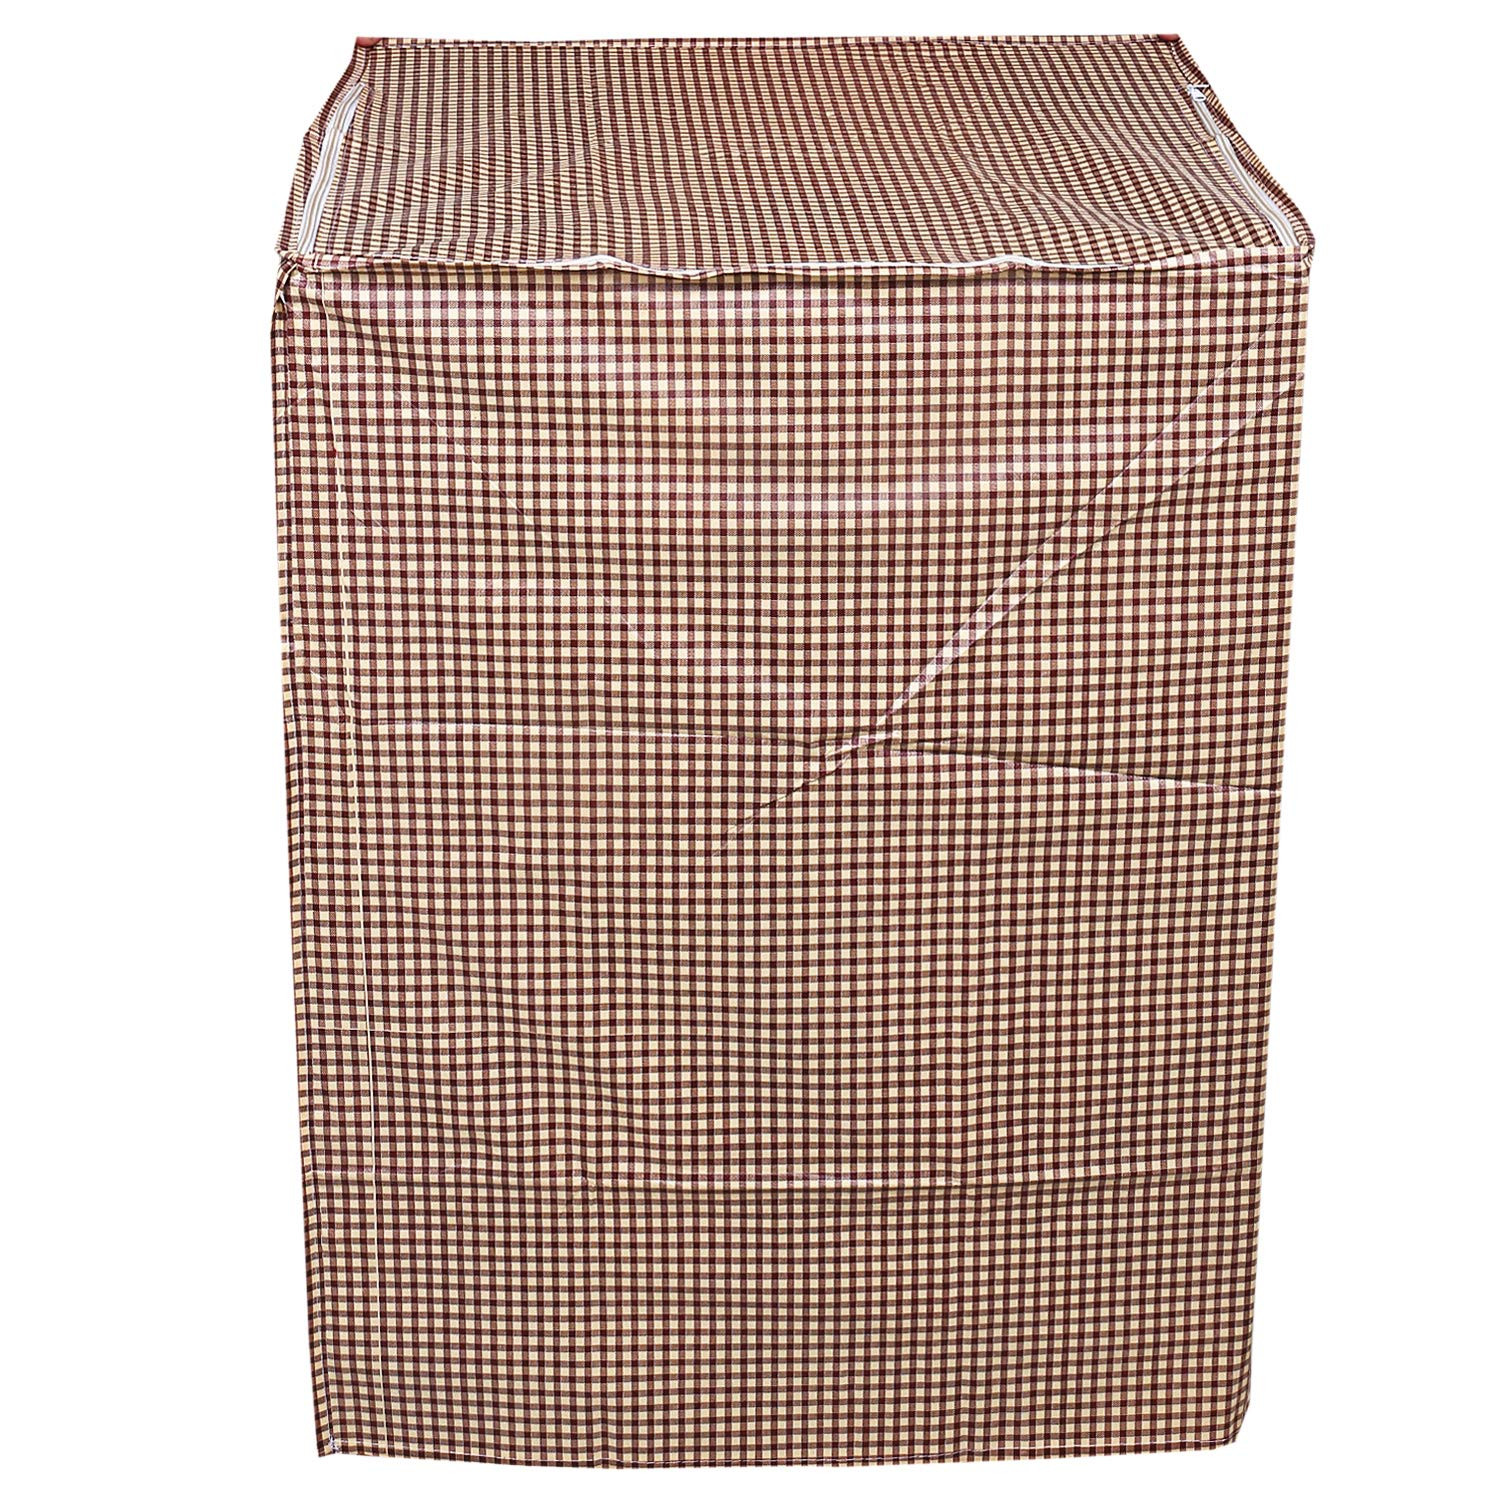 Kuber Industries PVC Top Load Fully Automatic Washing Machine Cover (Brown), CTKTC13566